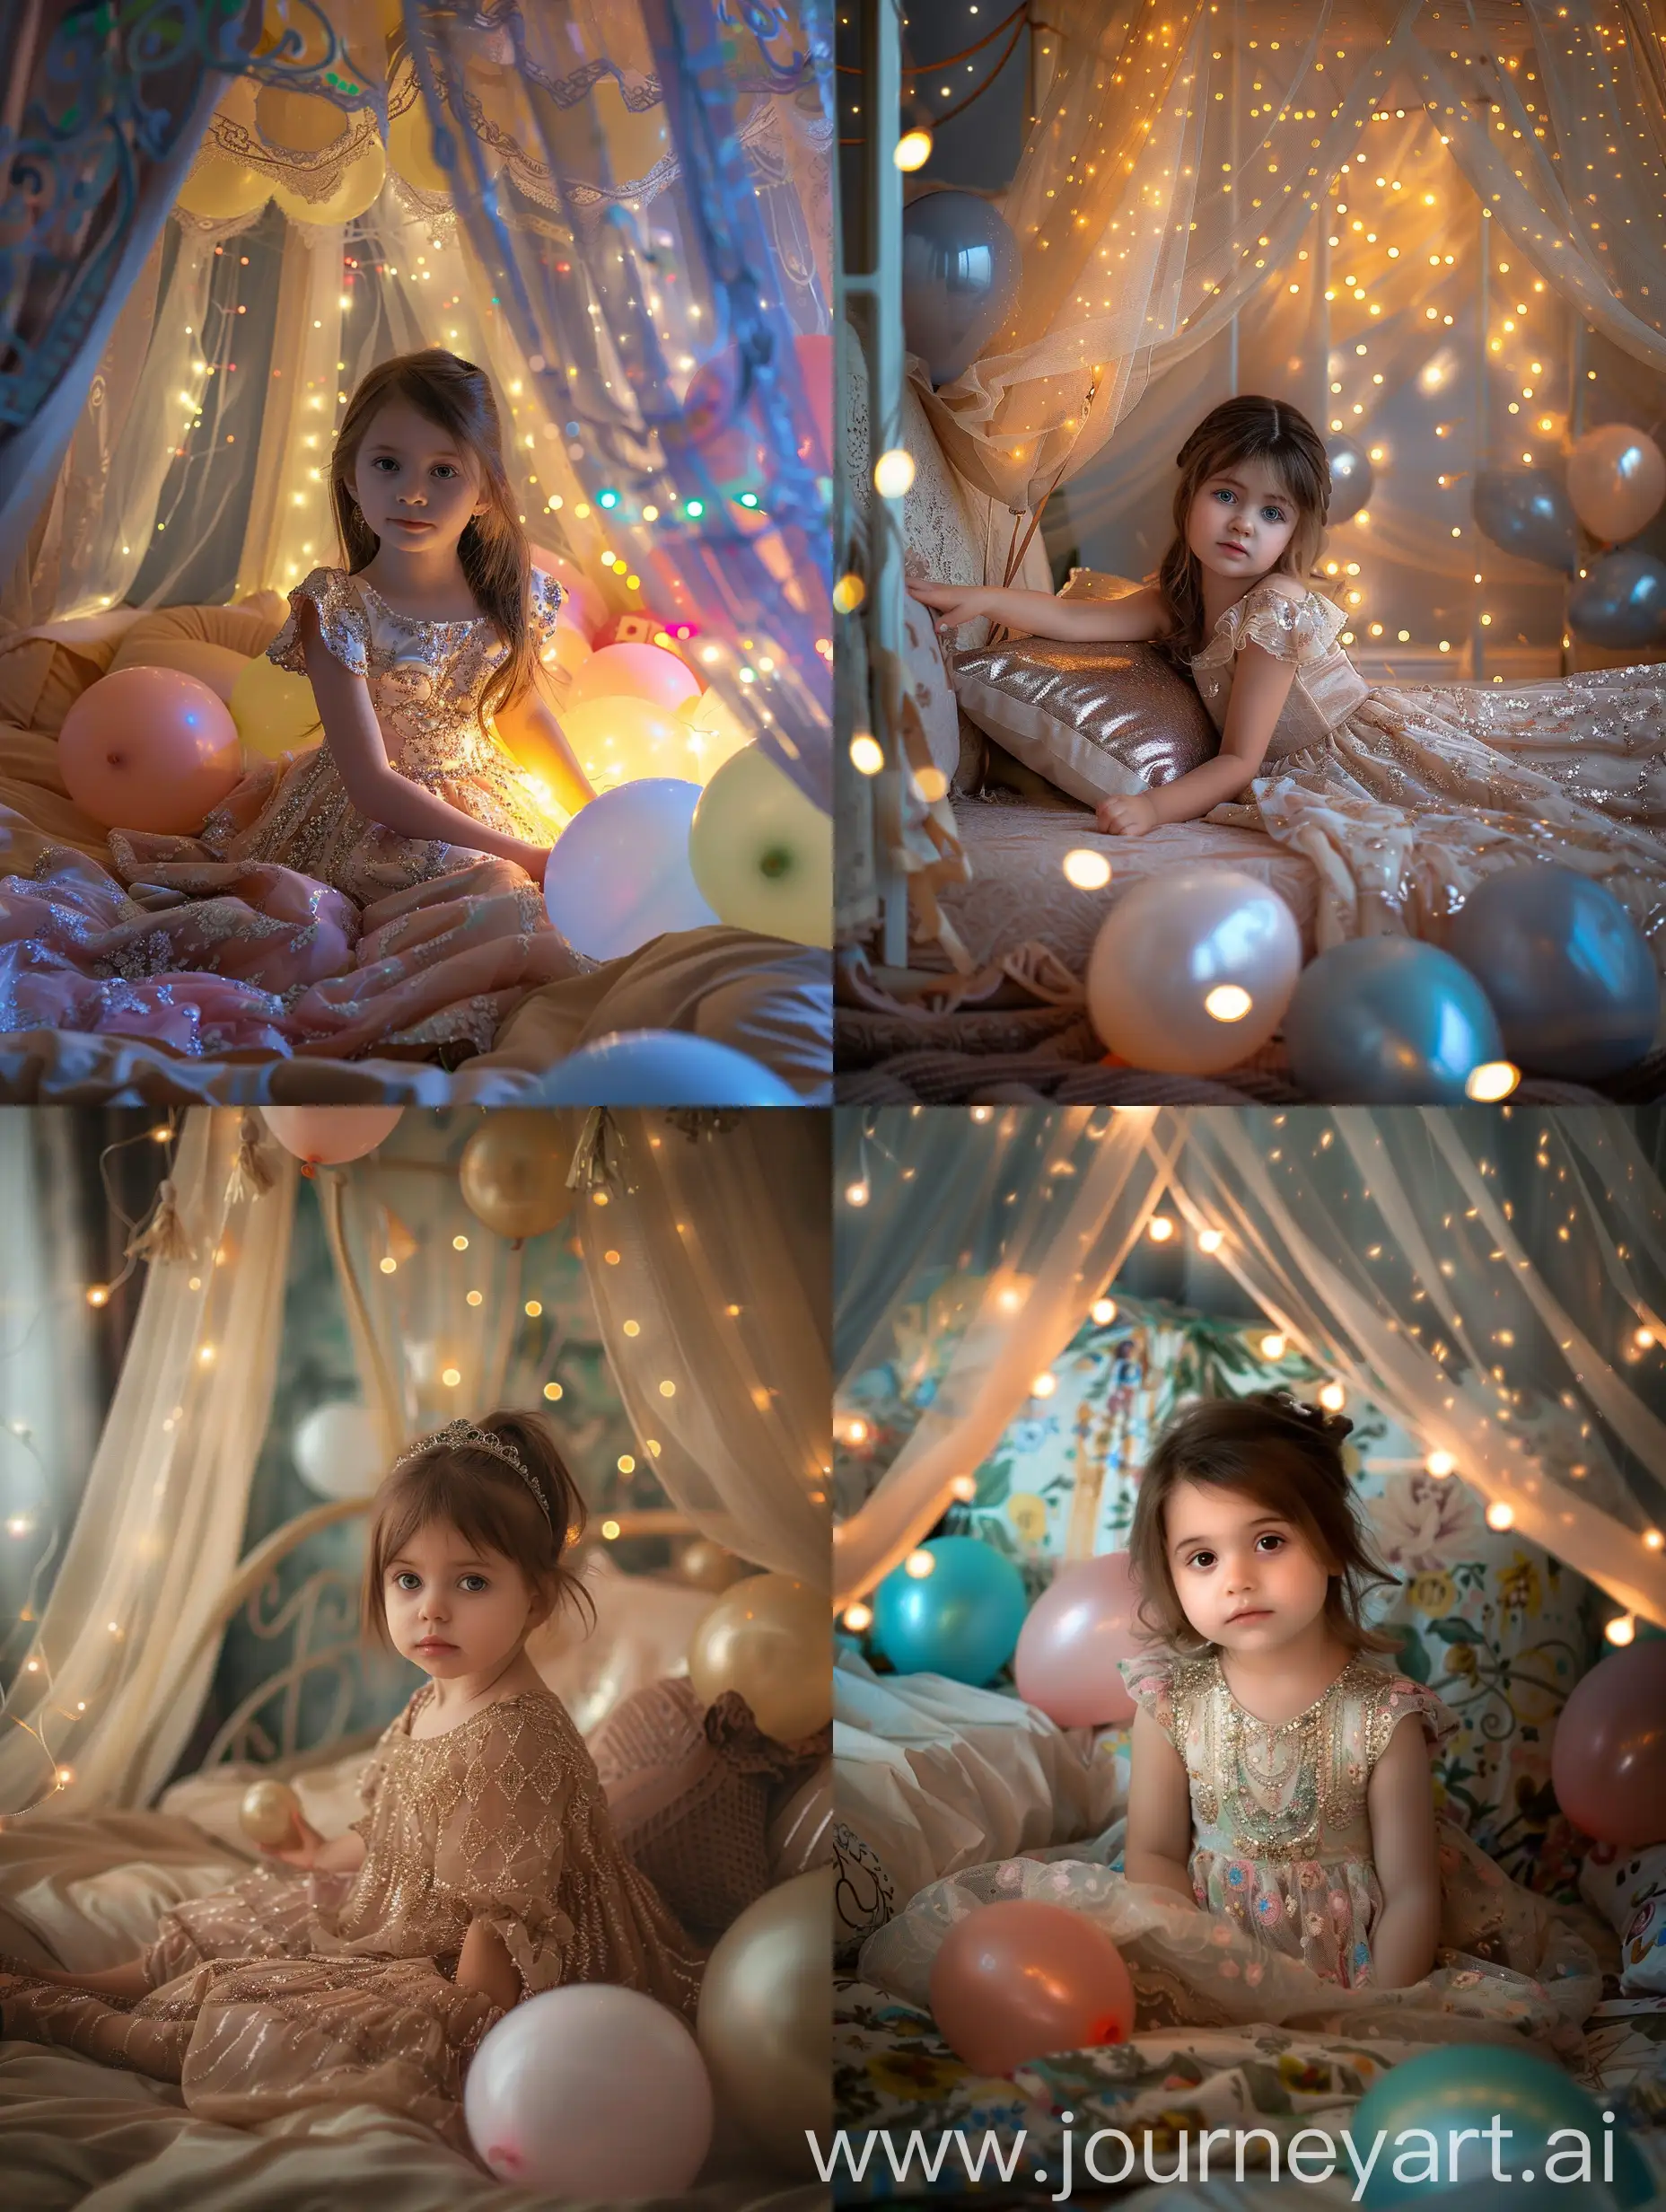 Charming-Little-Girl-in-Glowing-Canopy-Bed-with-Balloons